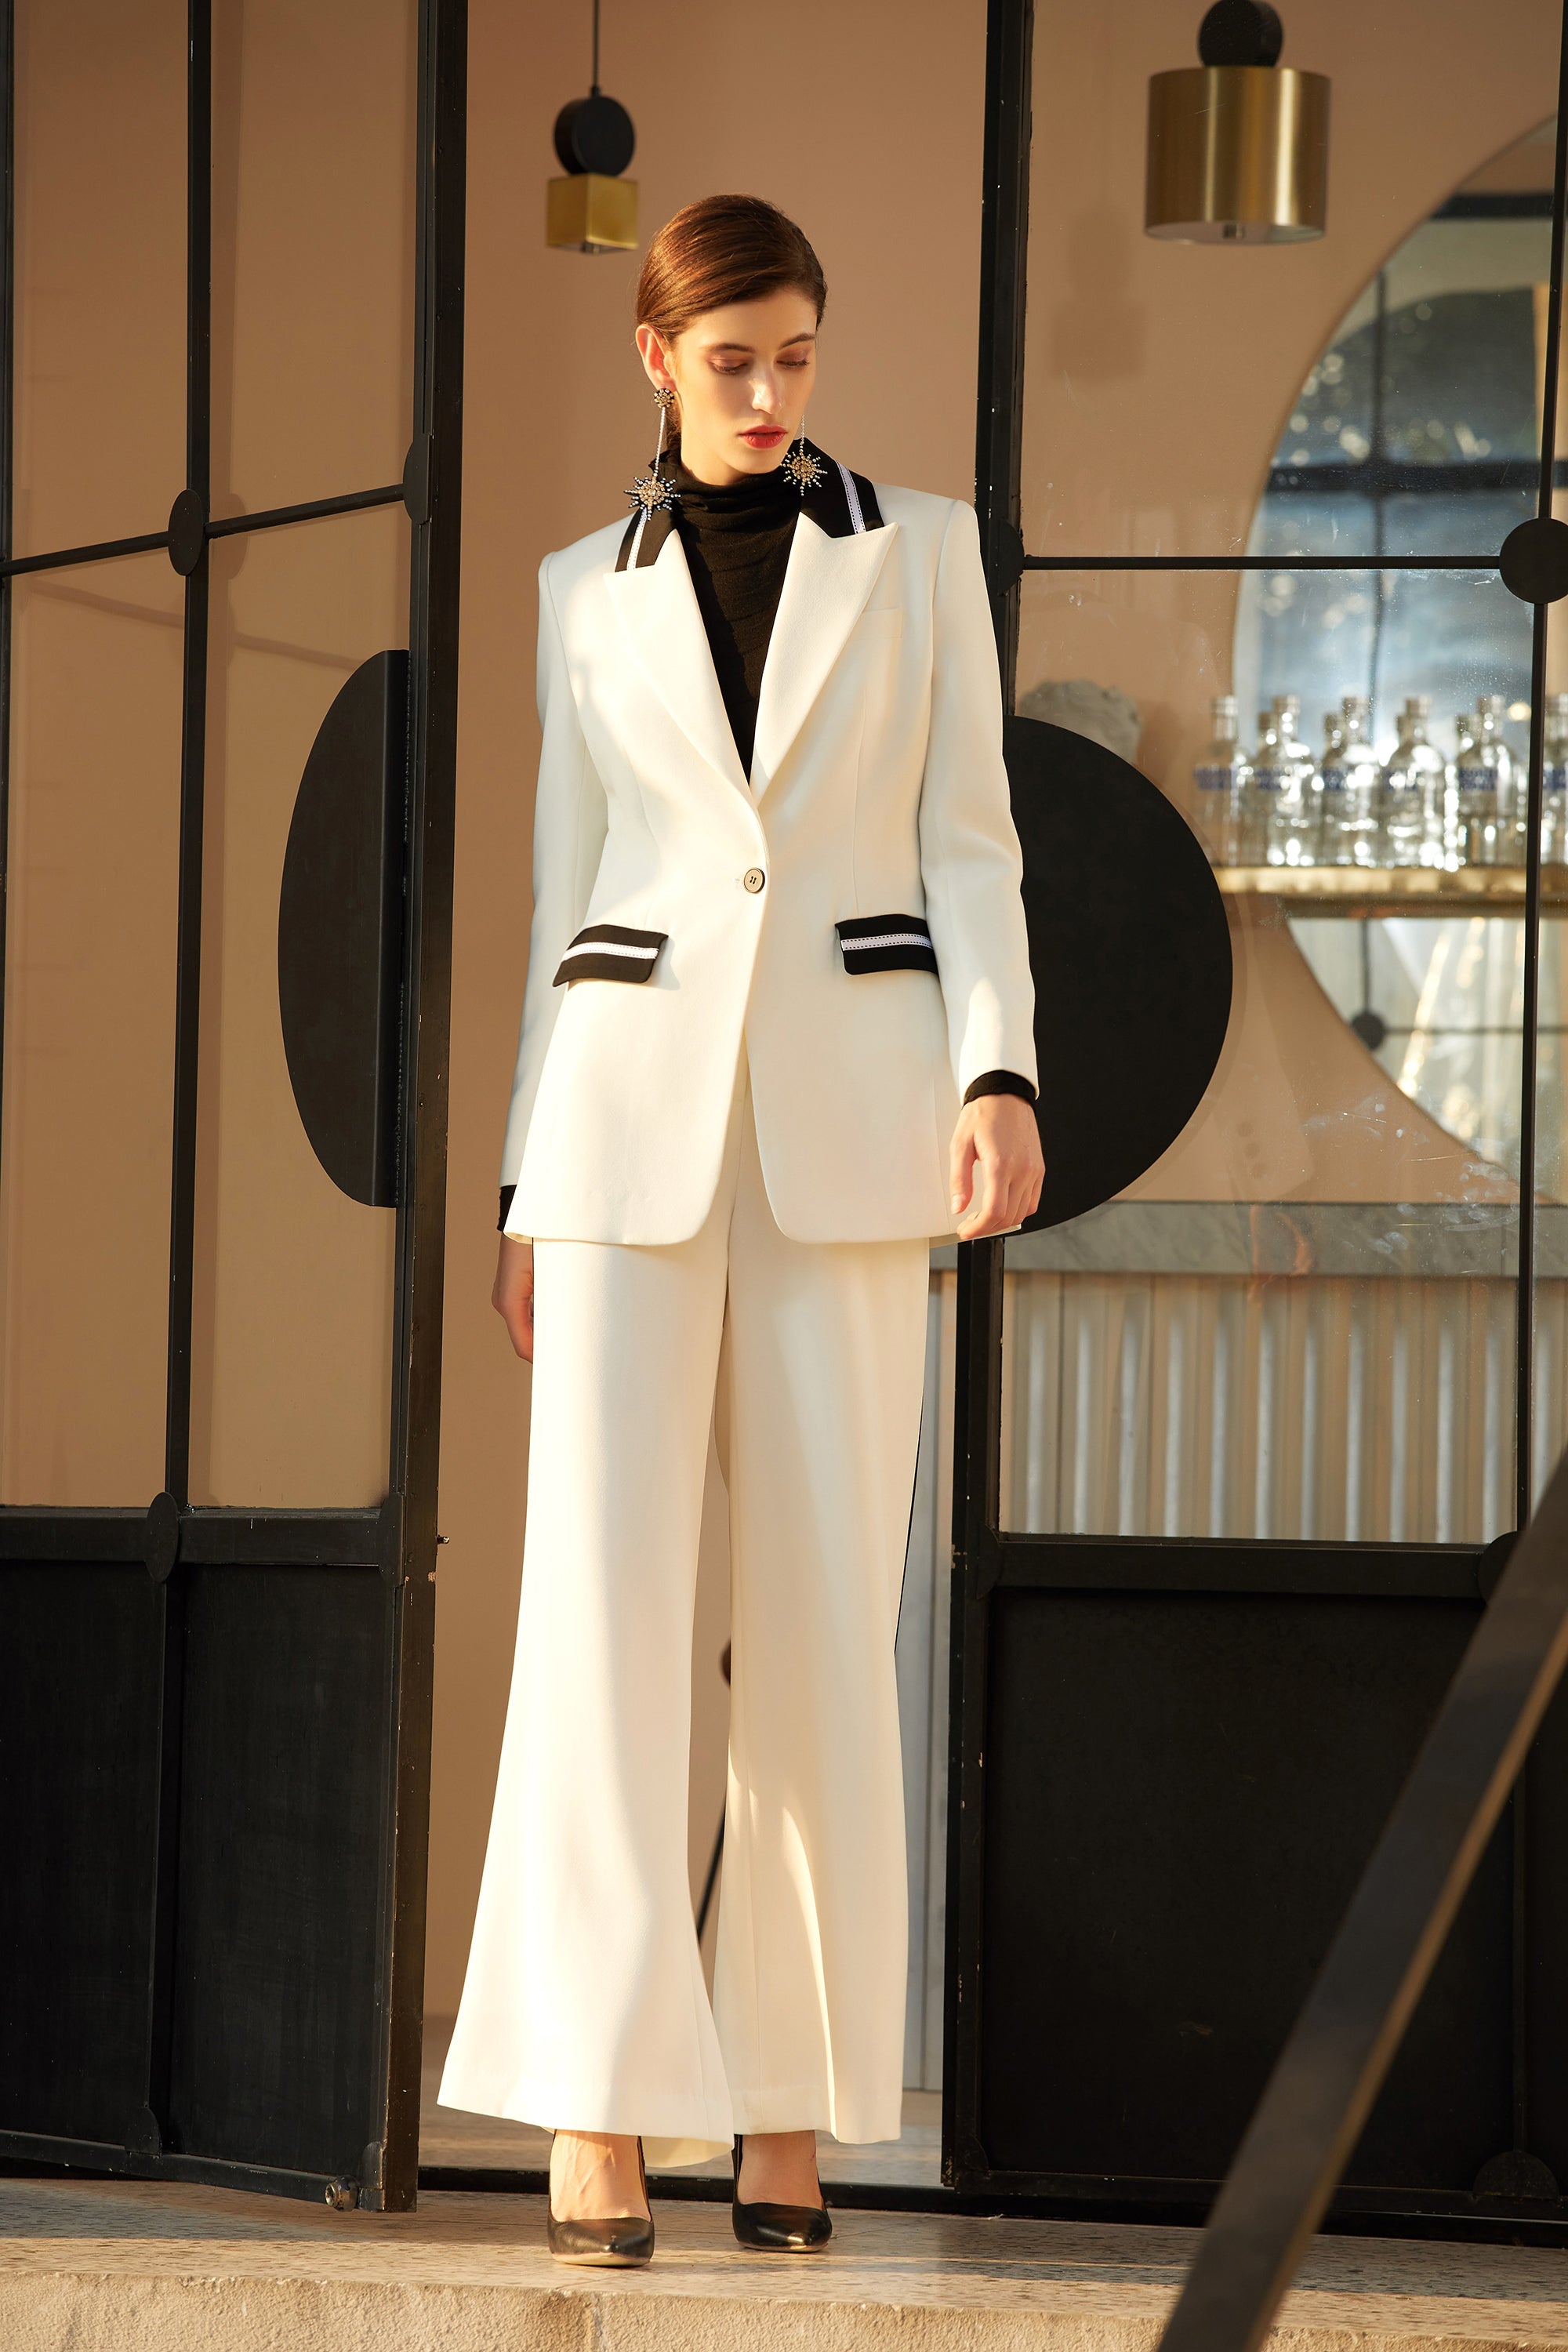 The Pant Suit for Young Professional Women